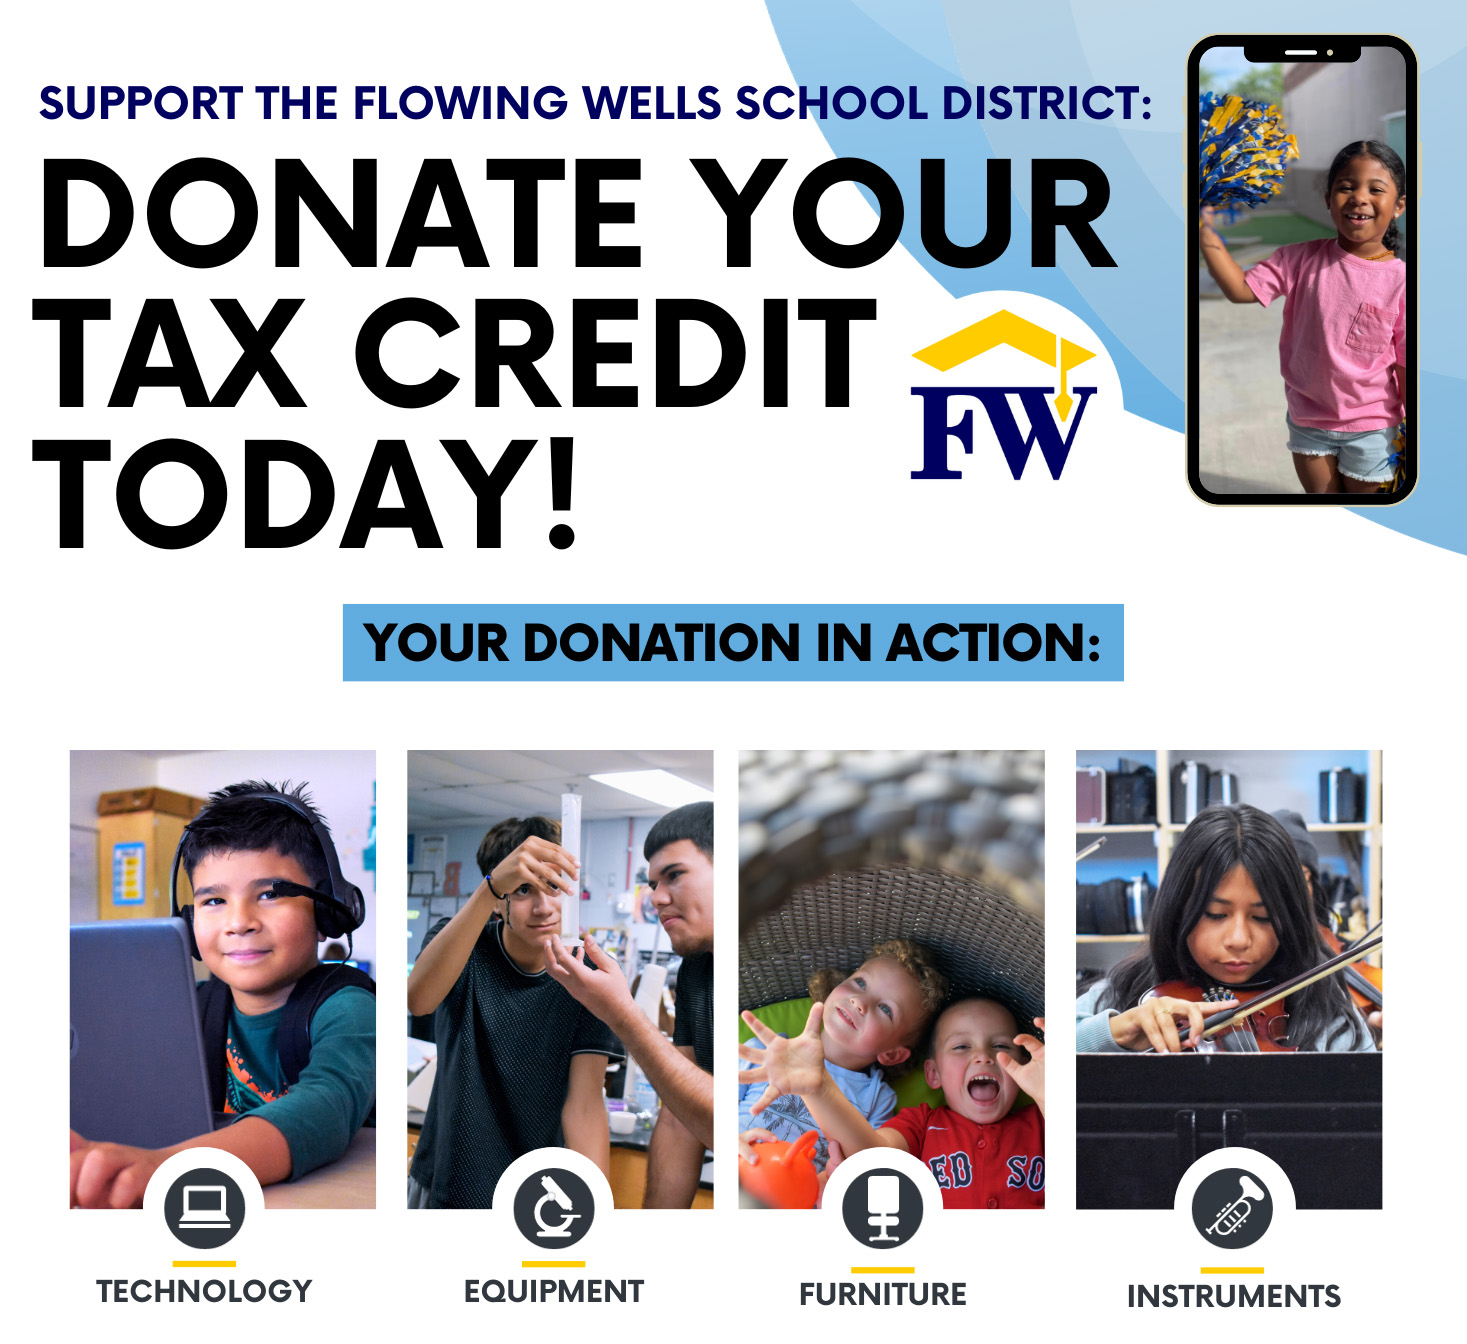 Support the Flowing Wells School District: Donate your tax credit today! Your Donation in Action: Technology, Equipment, Furniture, Instruments